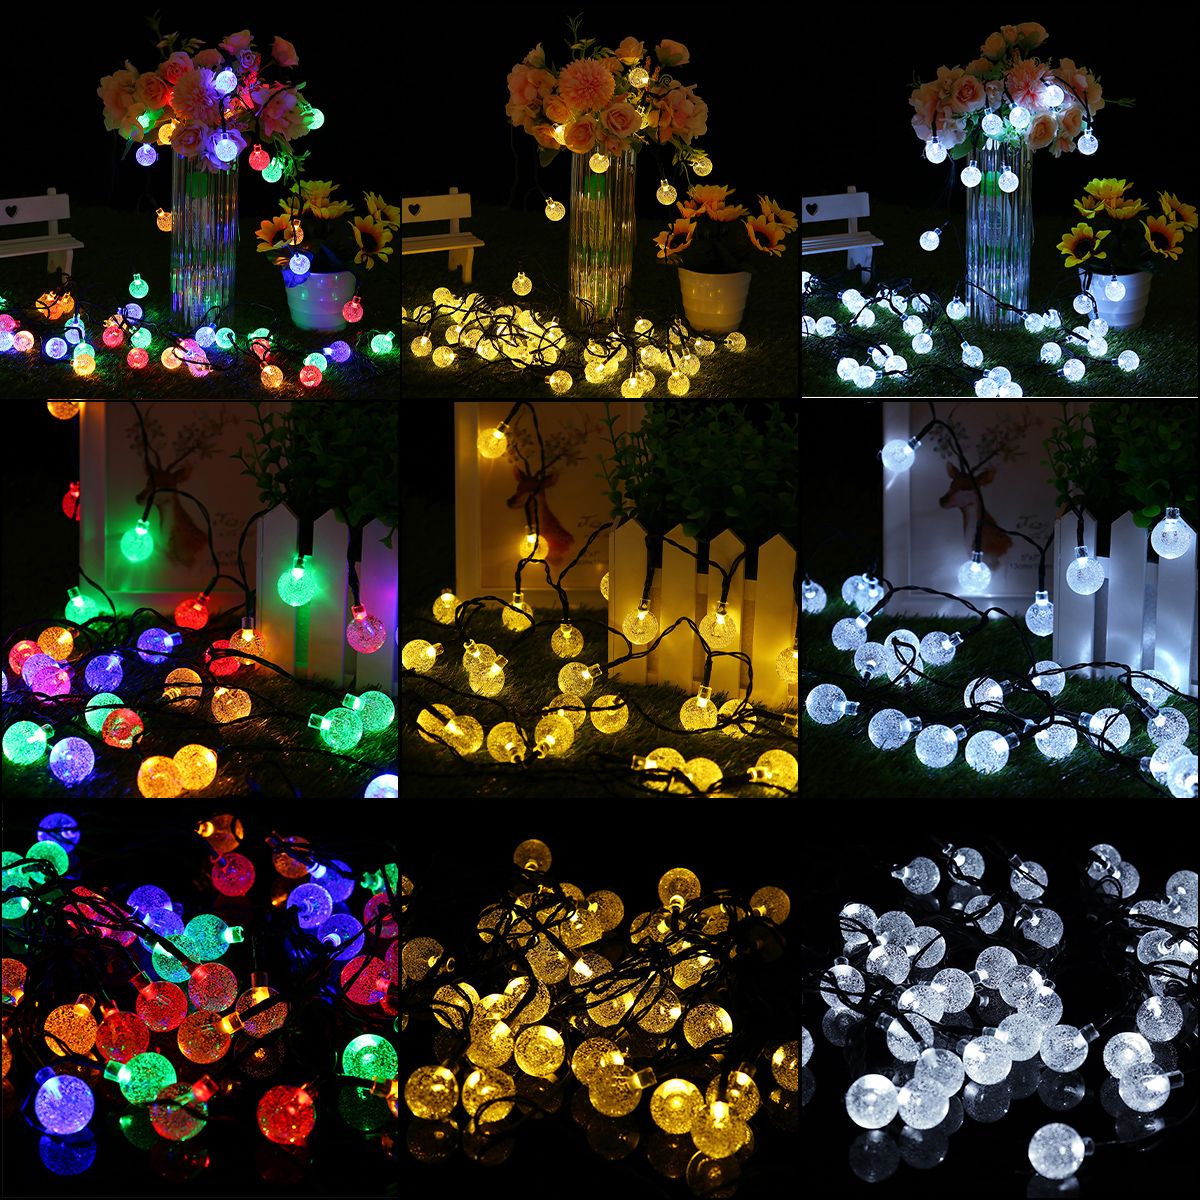 48M65M7M-2-Modes-203050LED-Solar-String-Light-Outdoor-Lawn-Lamp-Christmas-Decorations-Clearance-Chri-1754459